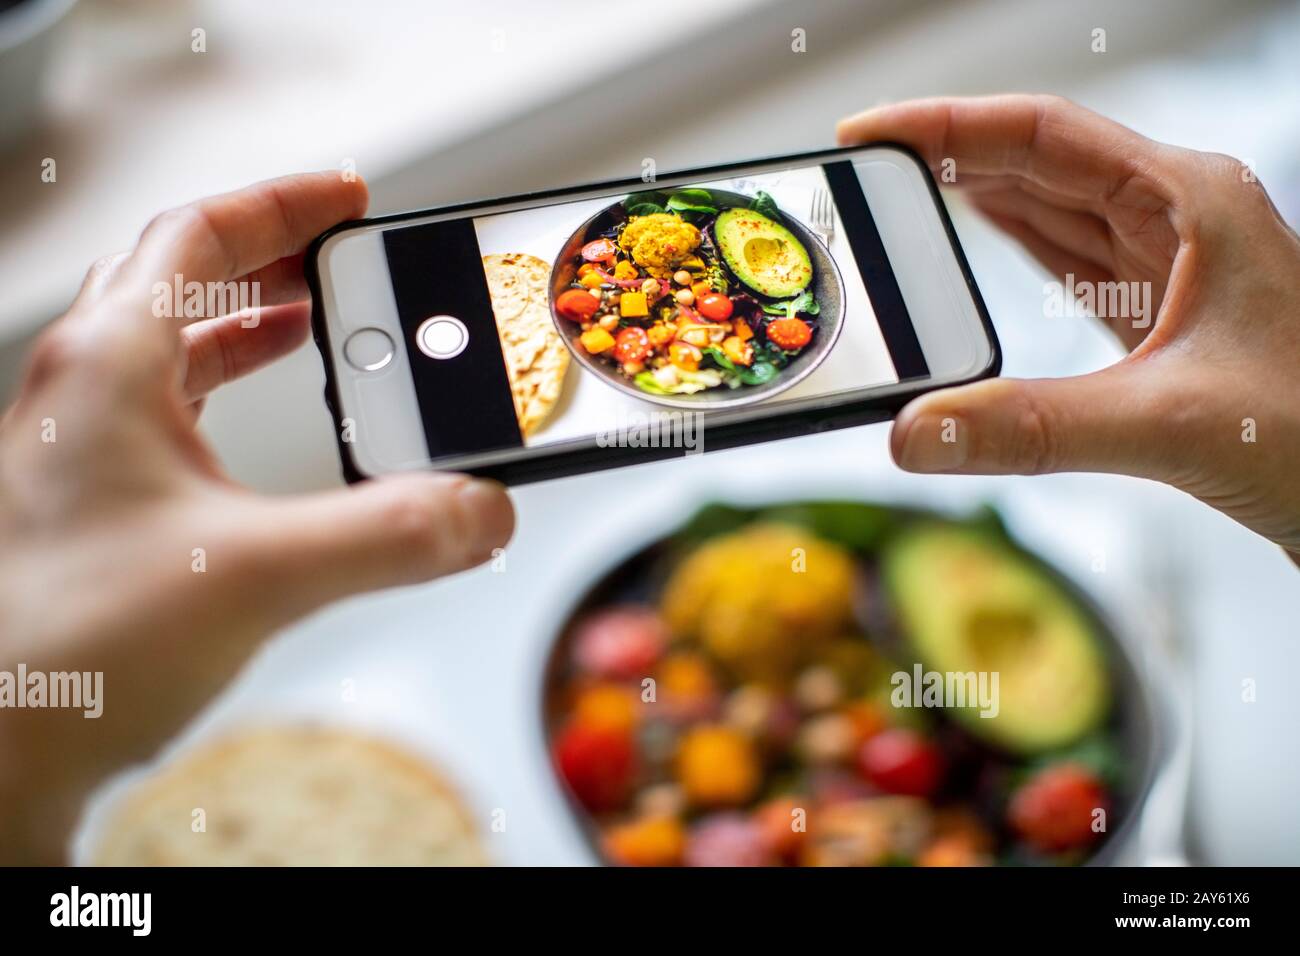 Close Up Of Woman Taking Photo Of Vegan Meal On Mobile Phone Stock Photo